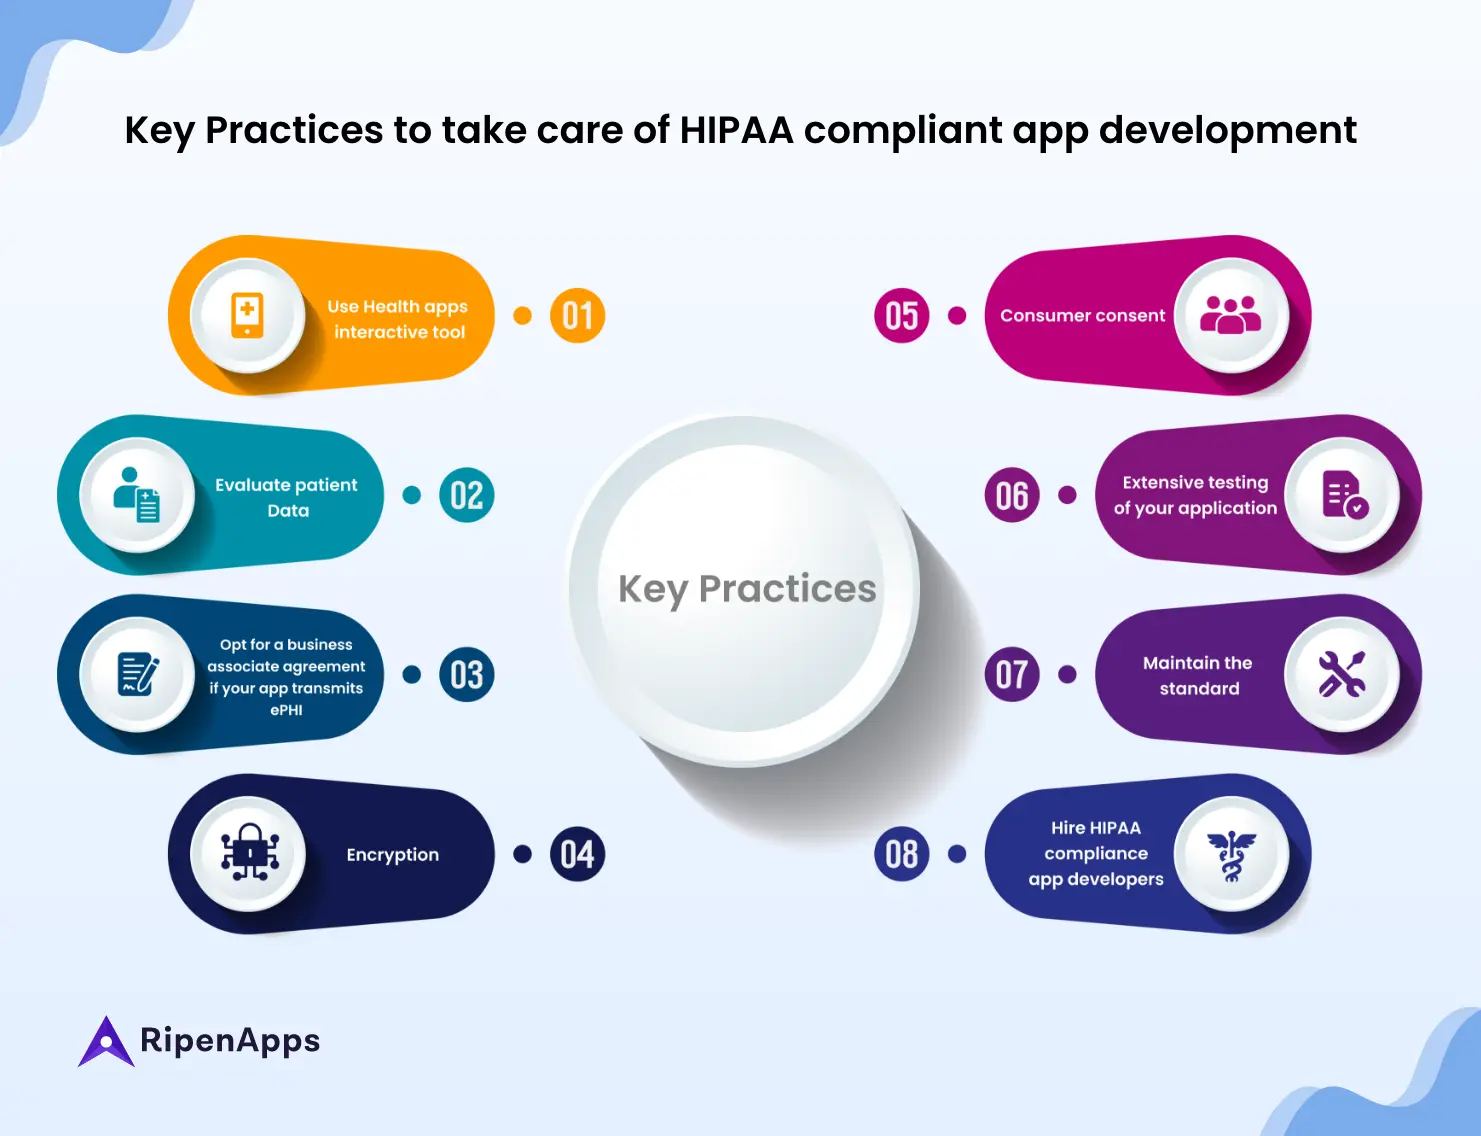 Key Practices to take care of HIPAA compliant app development